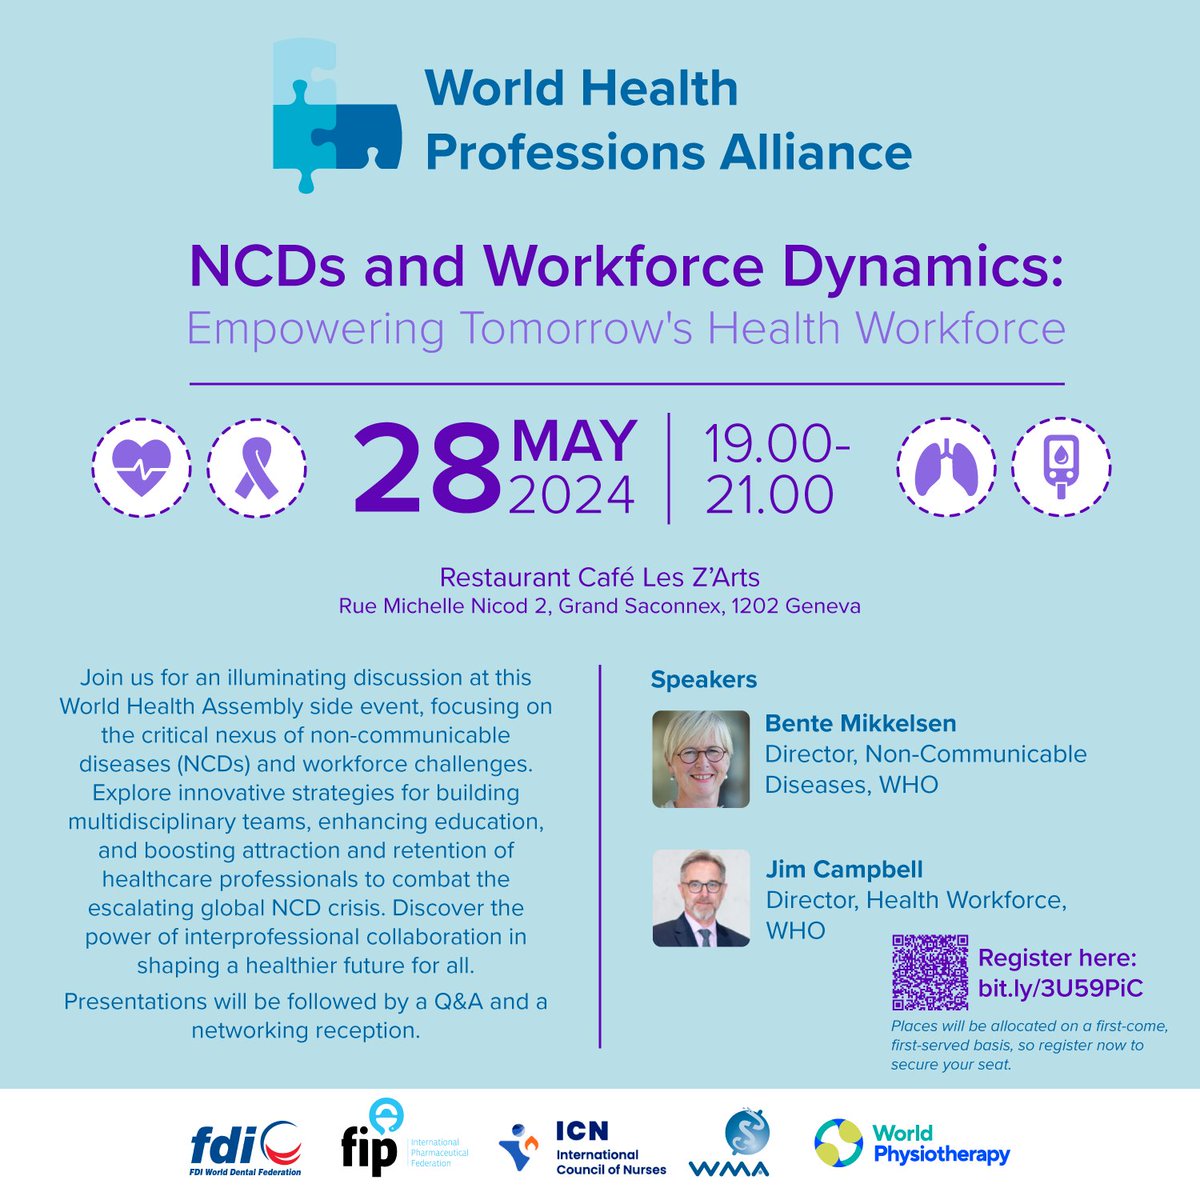 Will you be attending the 77th World Health Assembly in Geneva? Make sure to attend the @WHPAlliance side event on 'NCDs and Workforce Dynamics: Empowering Tomorrow's Health Workforce'. Register now at ow.ly/or3r50RykMo! #WHA77